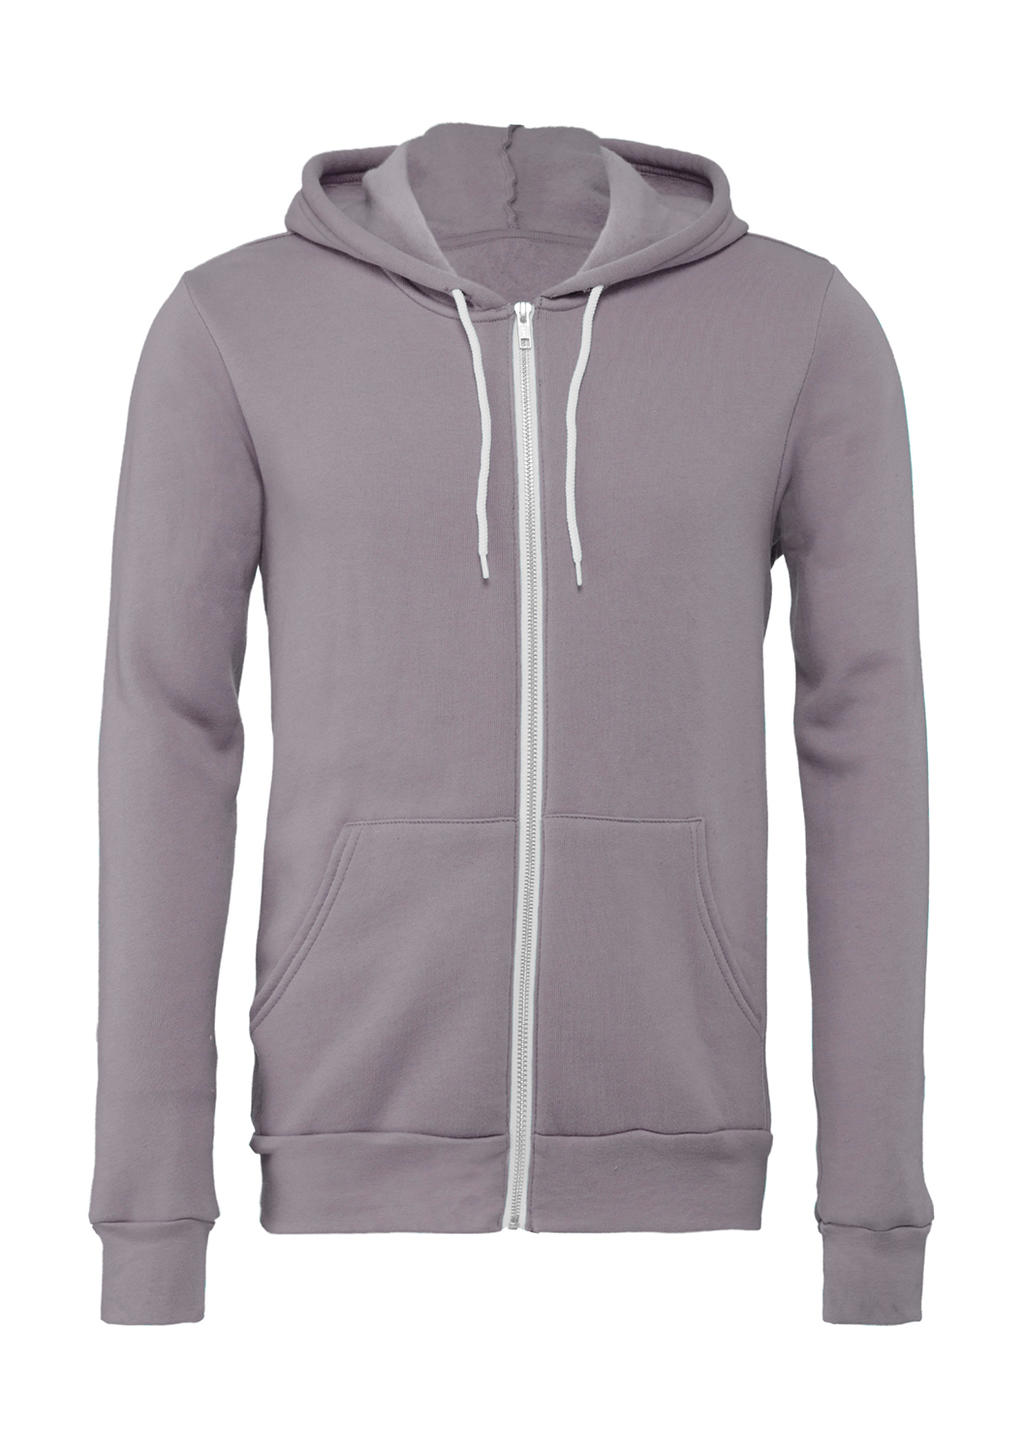  Unisex Poly-Cotton Full Zip Hoodie in Farbe Storm